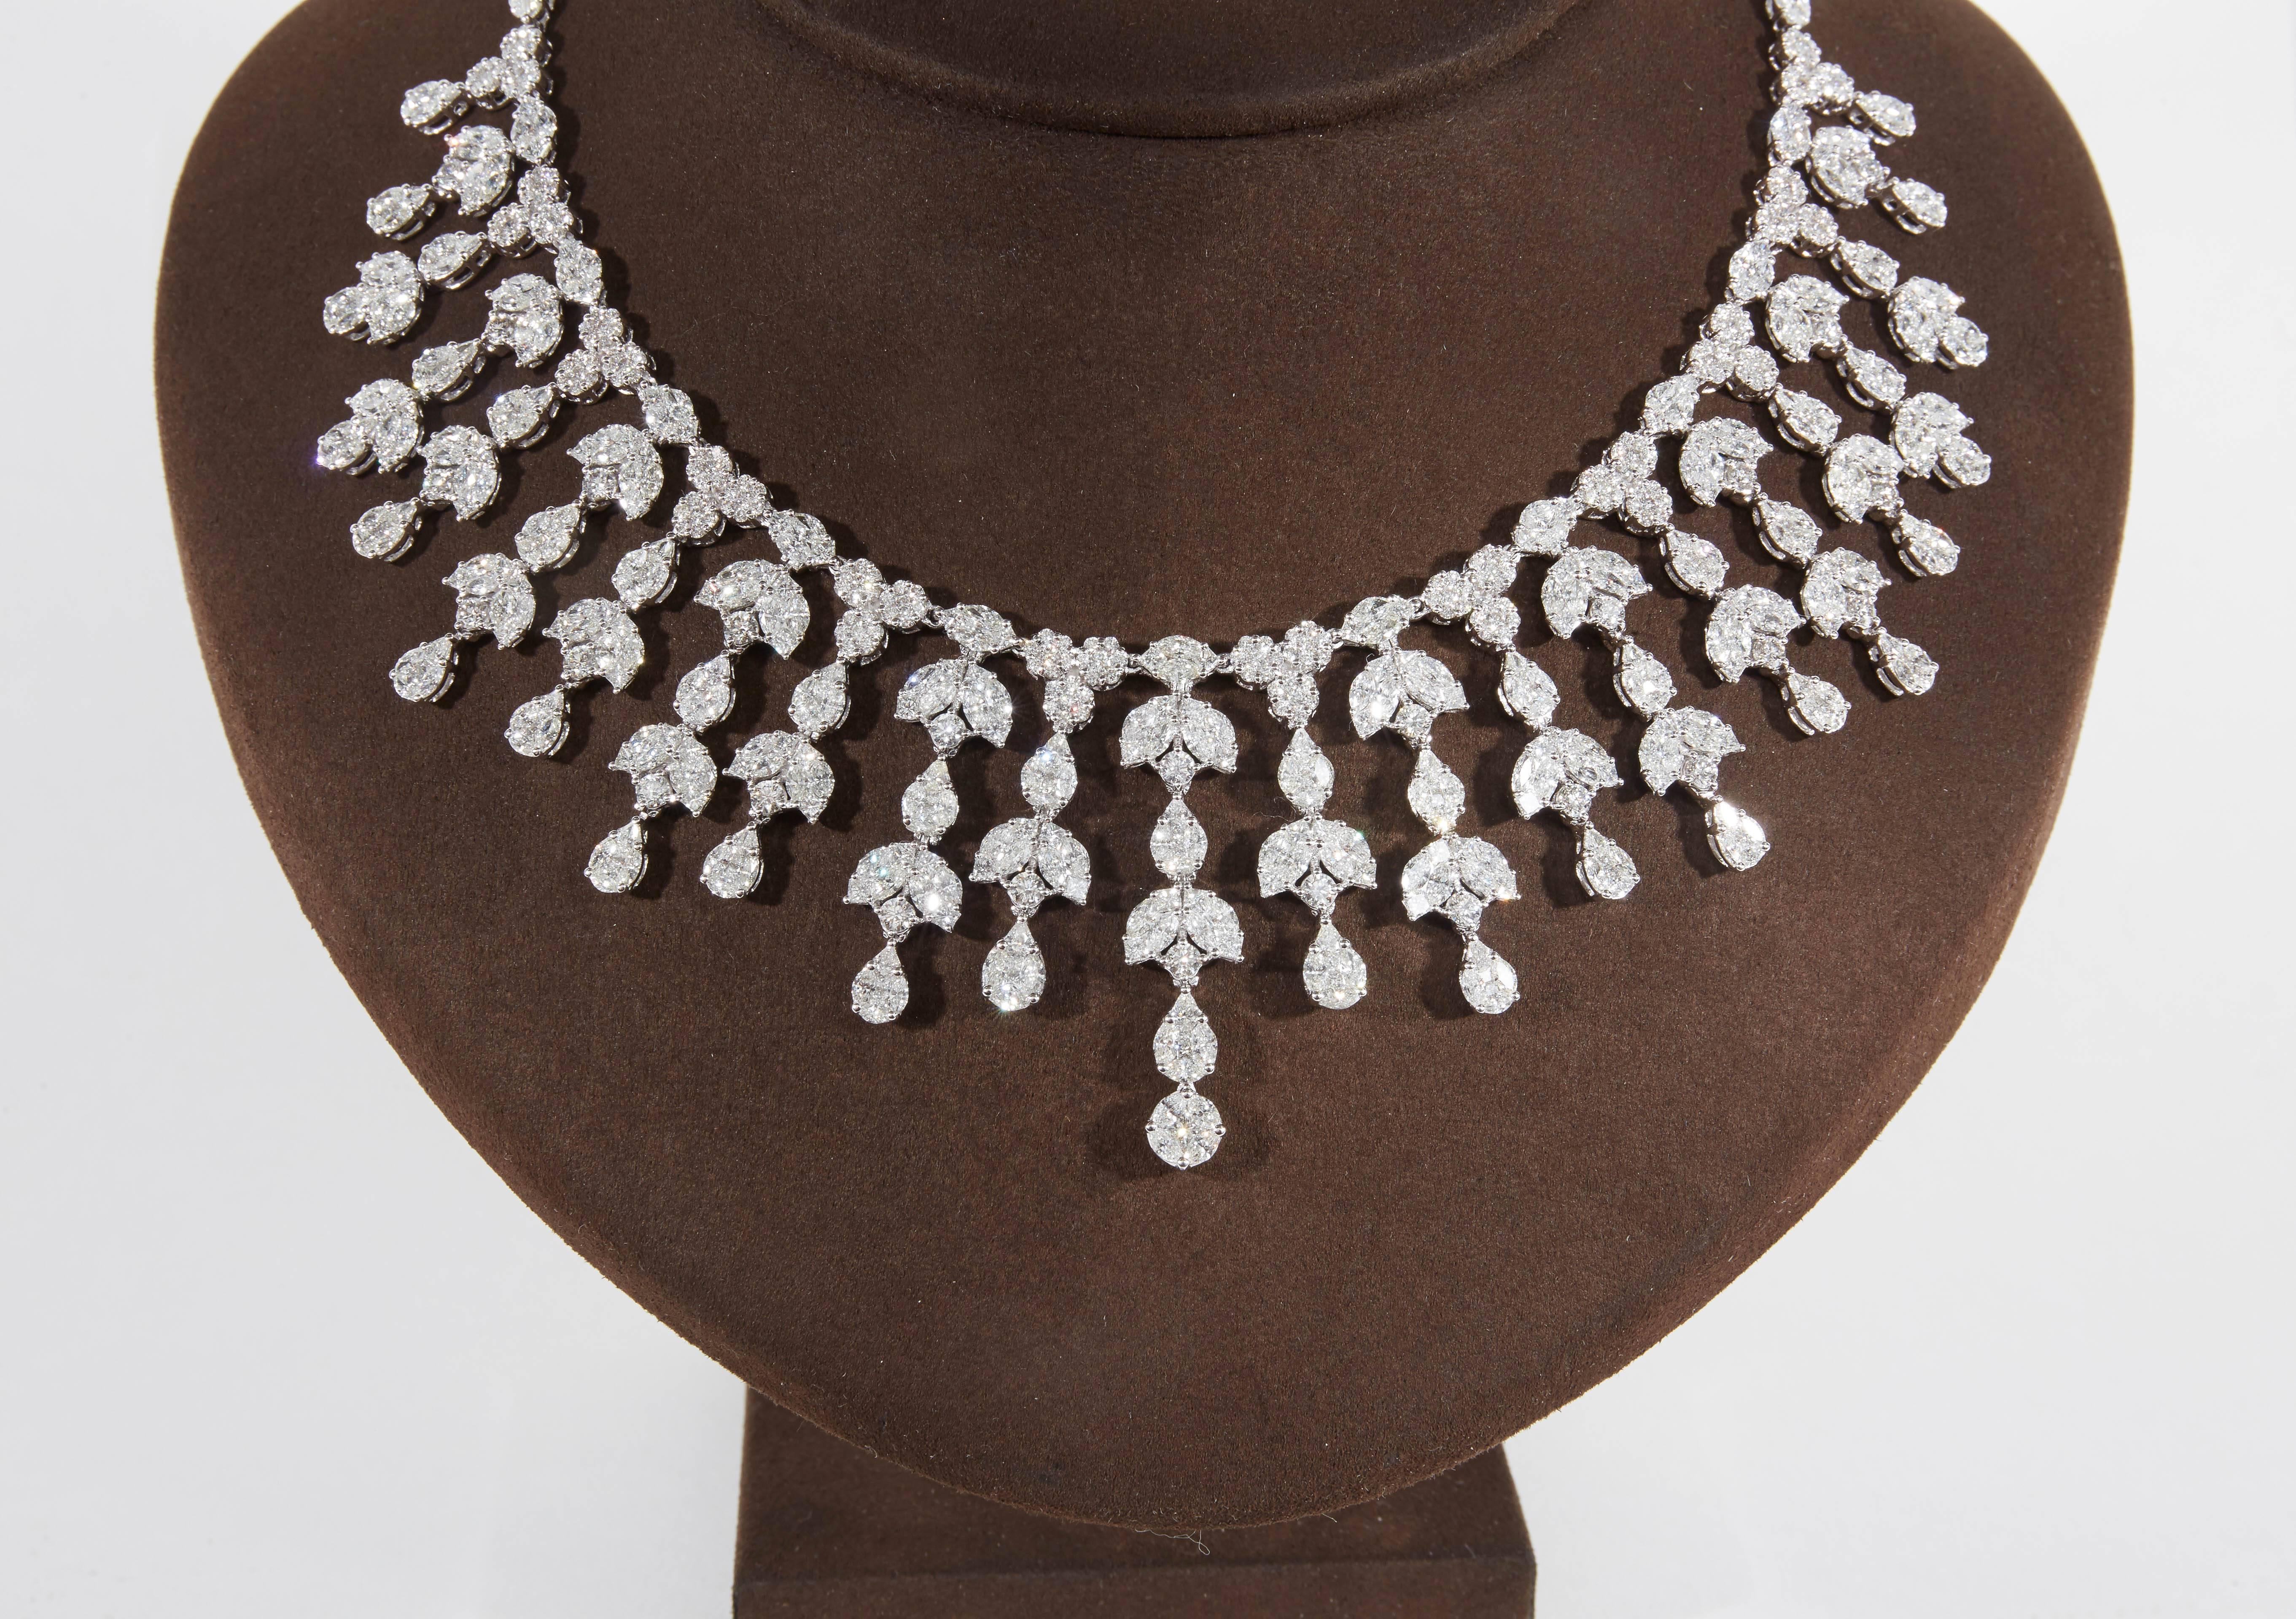 
An important diamond drop necklace. 

31.68 carats of multi shape white diamonds set into round, pear and marquise shapes. 

18k white gold

This necklace was designed maximizes brilliance and look.

17 inch length which can be adjusted. 

The